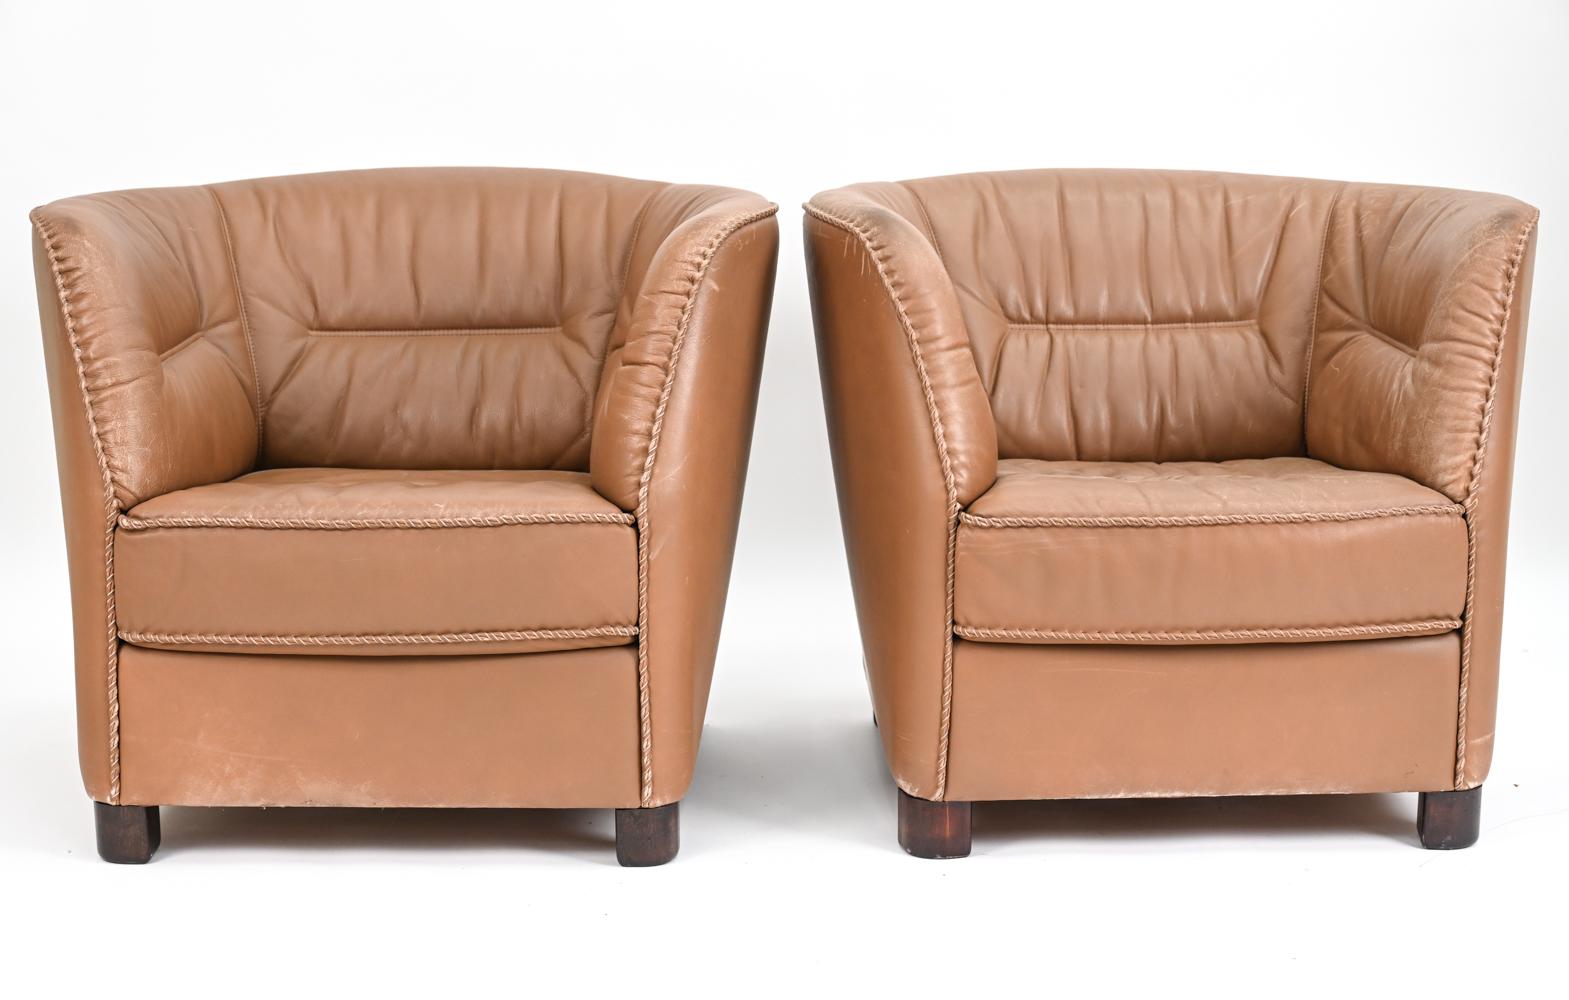 An unusual pair of Danish mid-century lounge chairs upholstered in fine grain tawny leather with whipstitch trim, featuring dark stained beechwood legs. These chairs, produced by Berg Furniture, c. 1970's, are both highly comfortable and